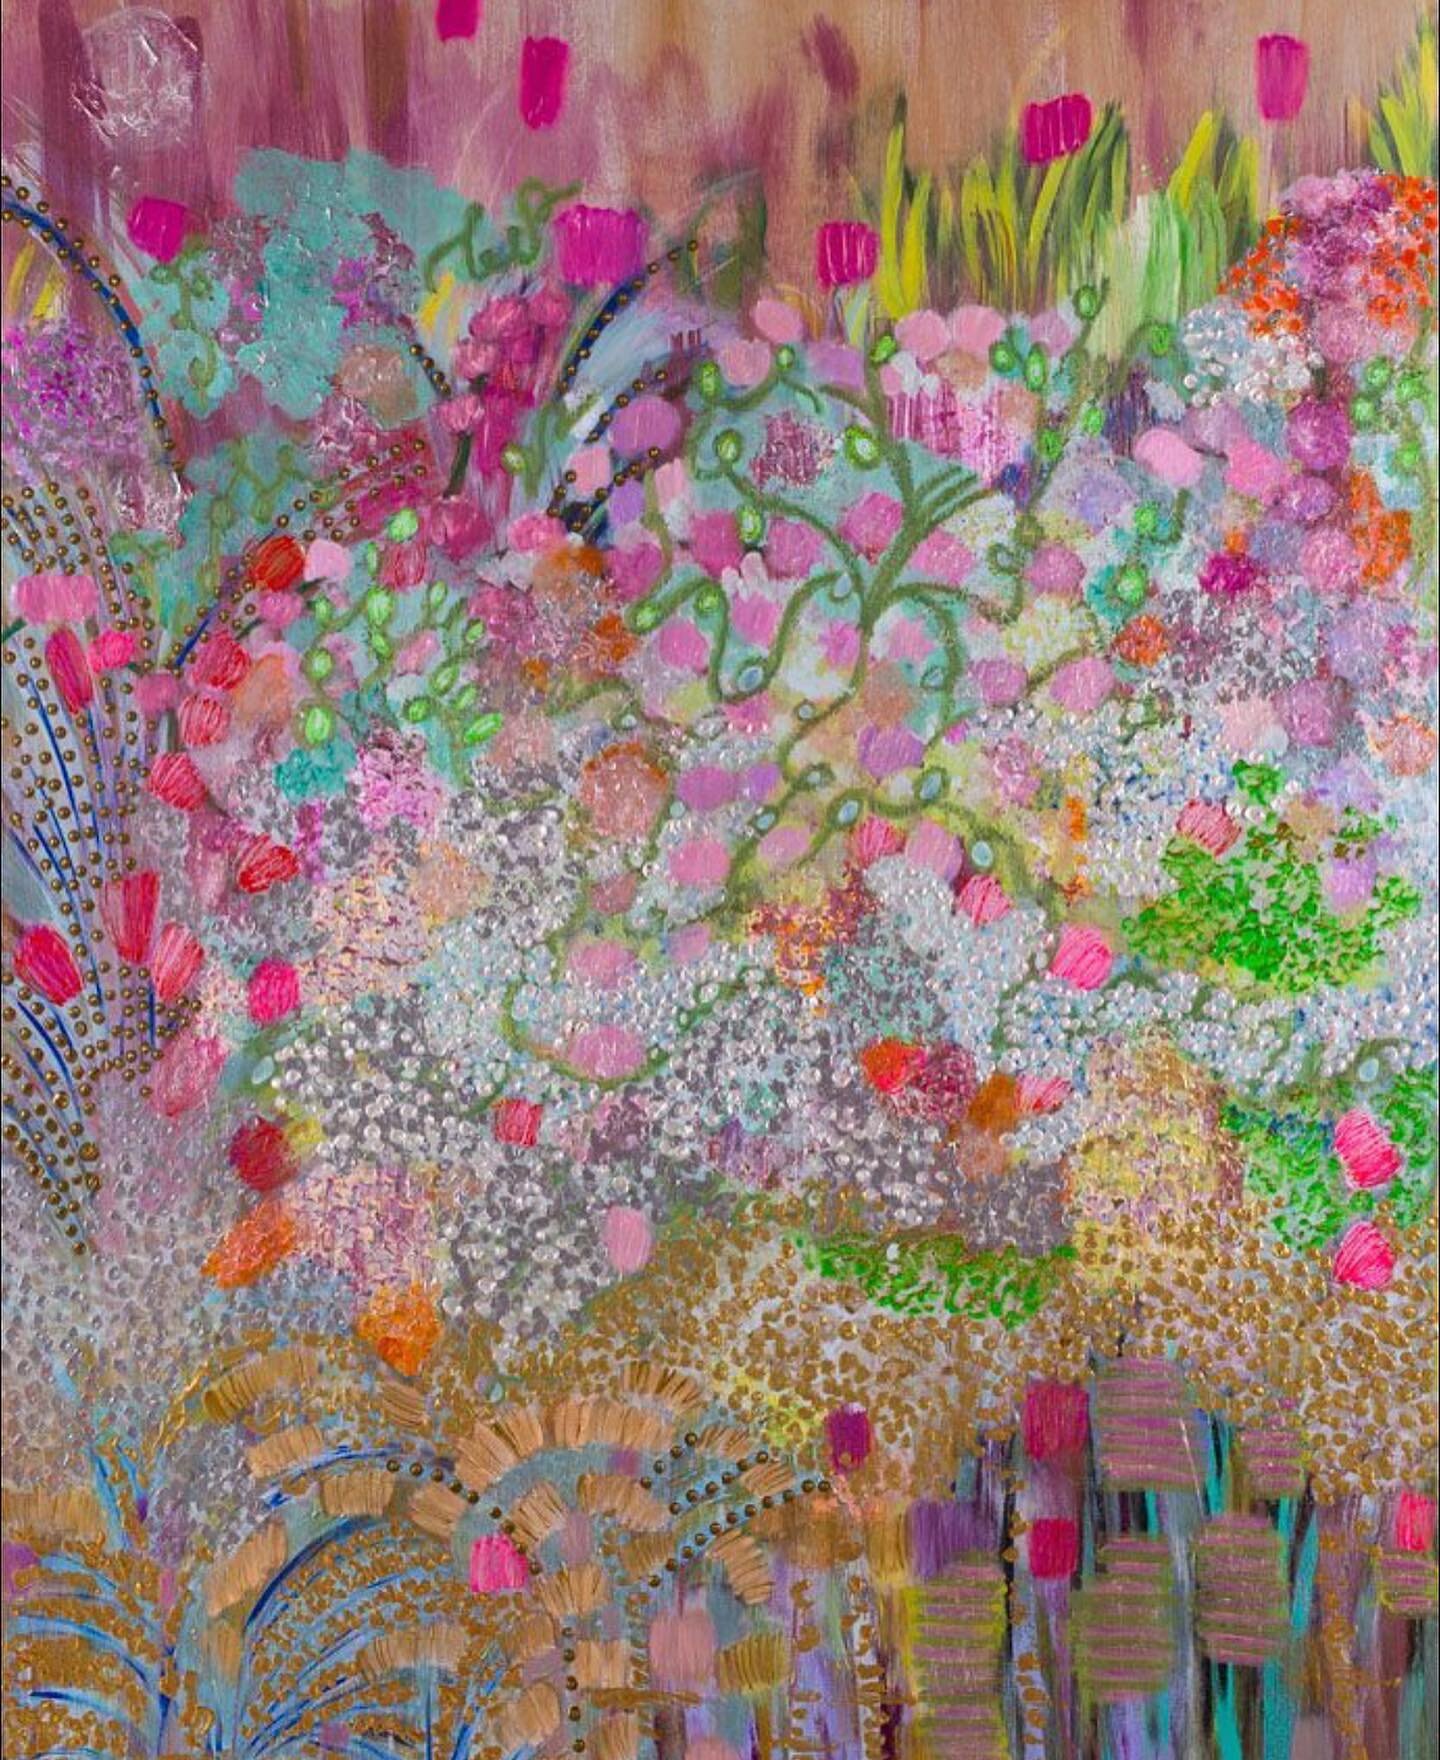 Jessica Collins 🌸

🌸 Fleur de Lis
🌸 Missed the Memo
🌸 That&rsquo;s a Keeper
🌸 Candy Land
🌸 Manic Monday 

available at AnArte Gallery! 🌸